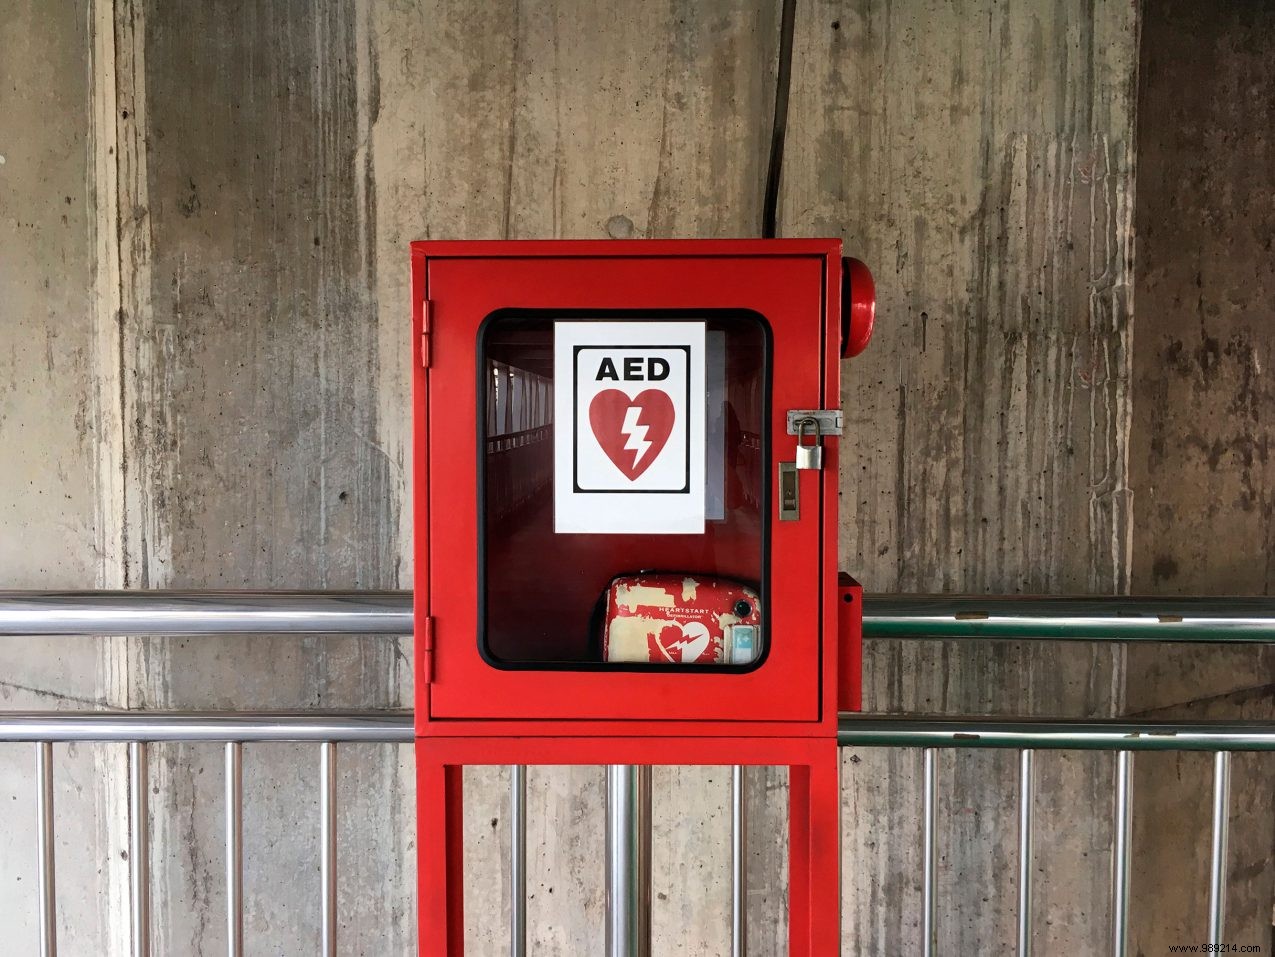 Do you know where the nearest AED is located? 